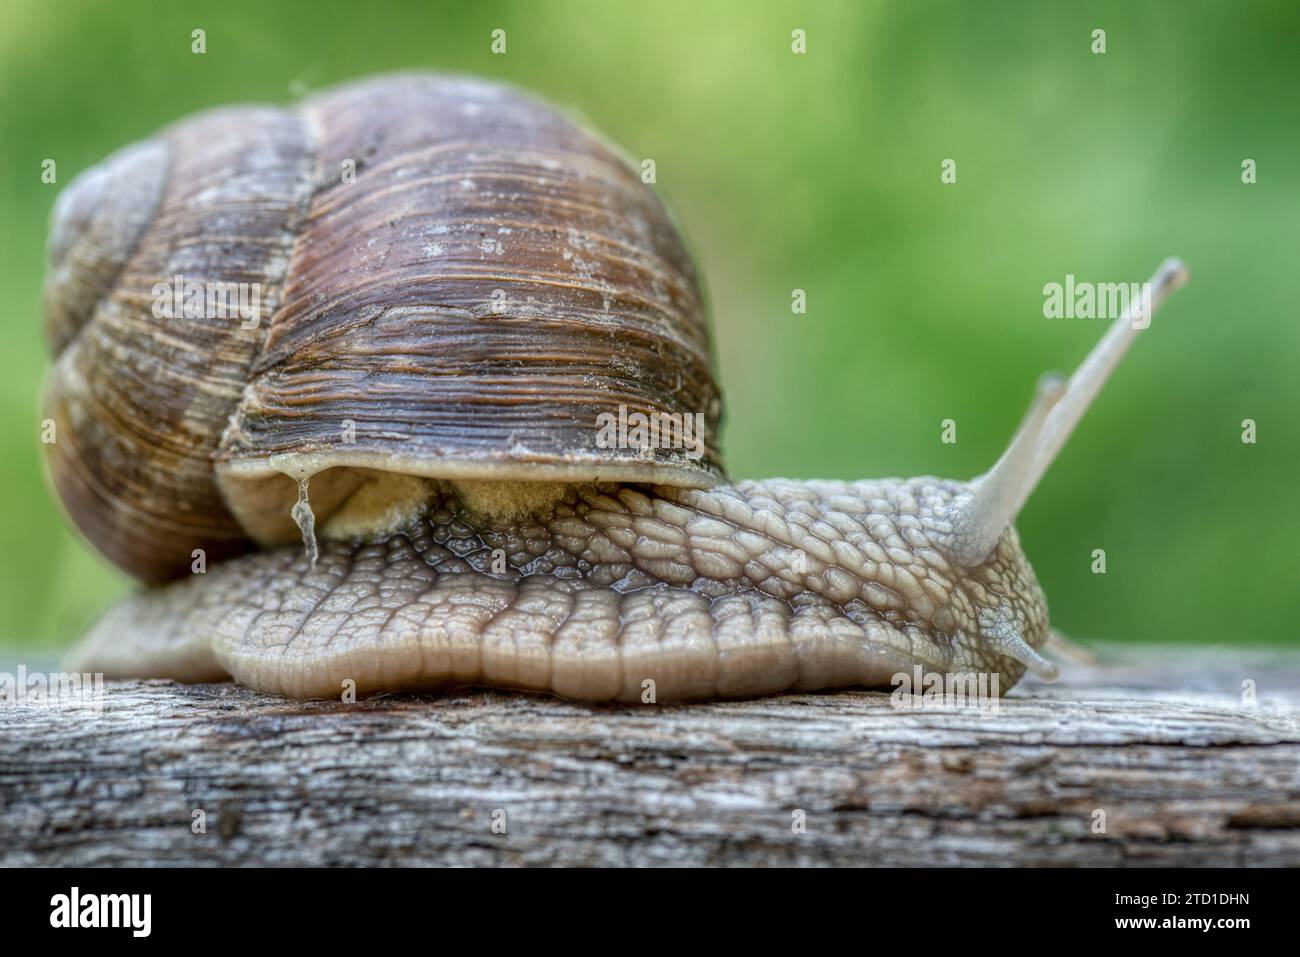 Helix pomatia also Roman snail or burgundy snail is a large air-breathing land snail. Pulmonary Gastropod Mollusk, family Helicidae stock photo Stock Photo